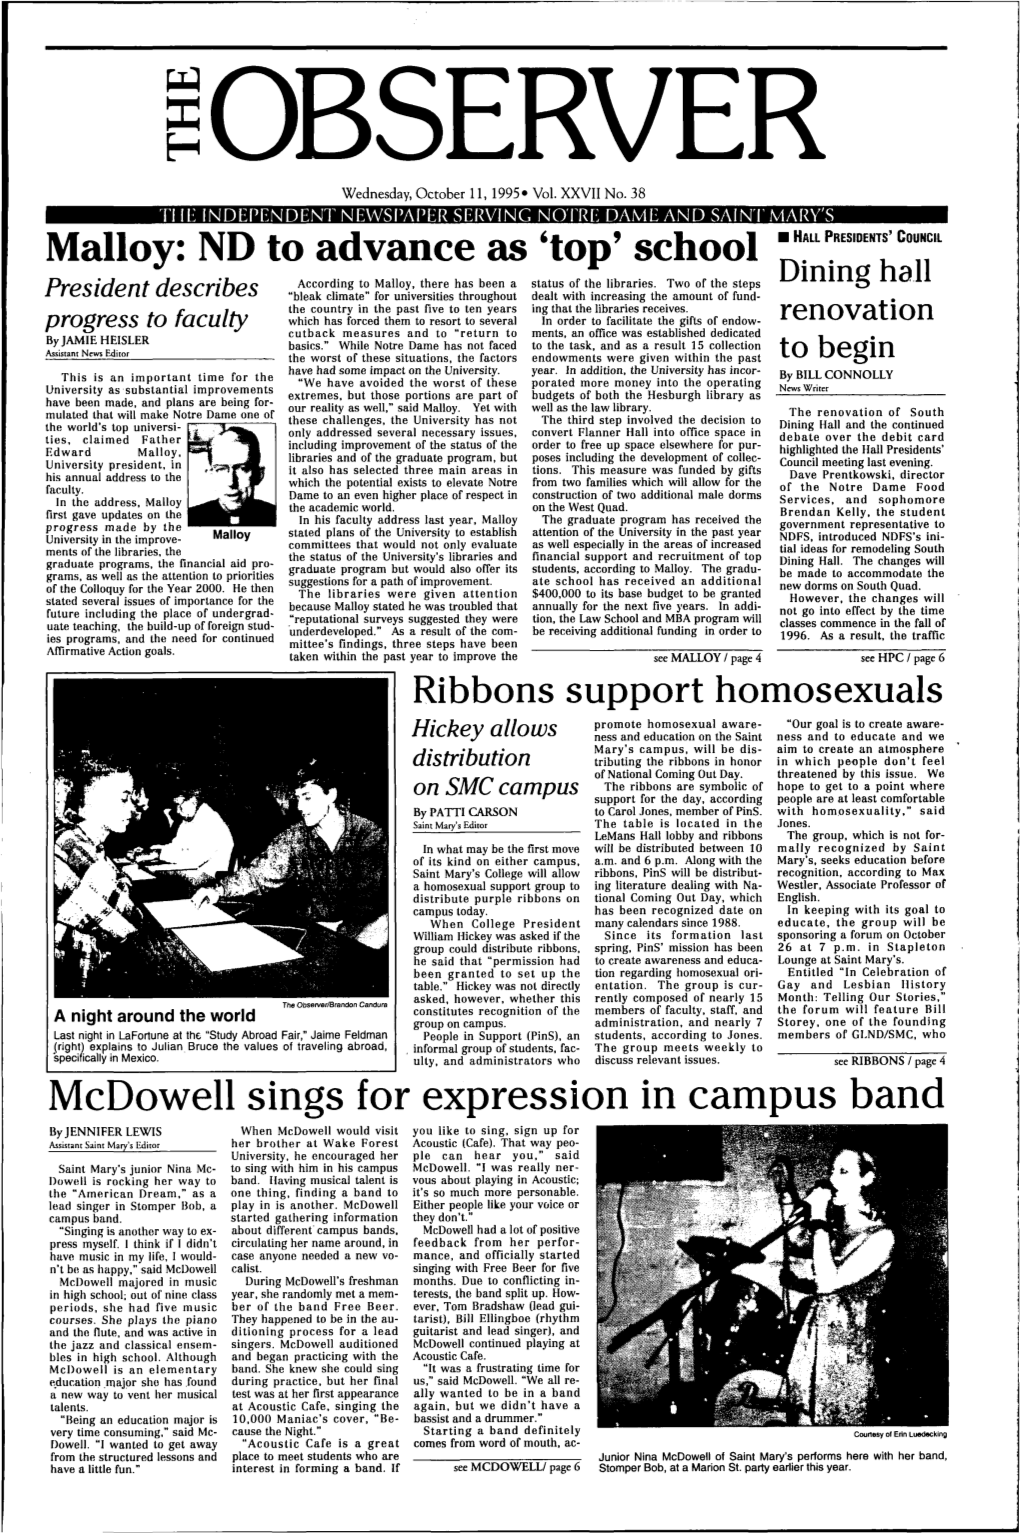 Mcdowell Sings for Expression in Campus Band